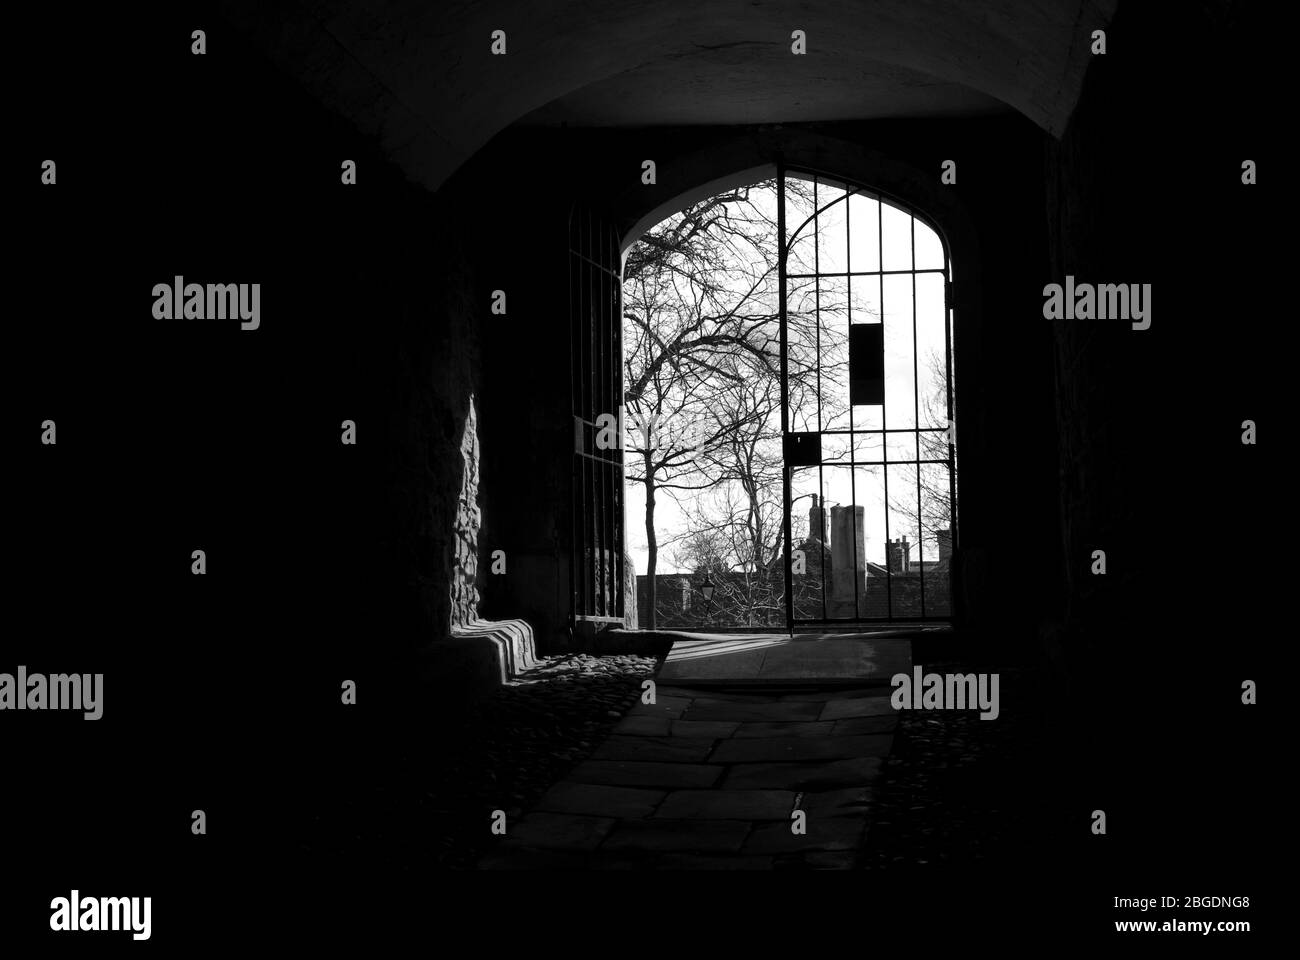 Monochrome image showing a dark passage way leading to a large metal gate set in the wall with one side open and sun coming in Stock Photo